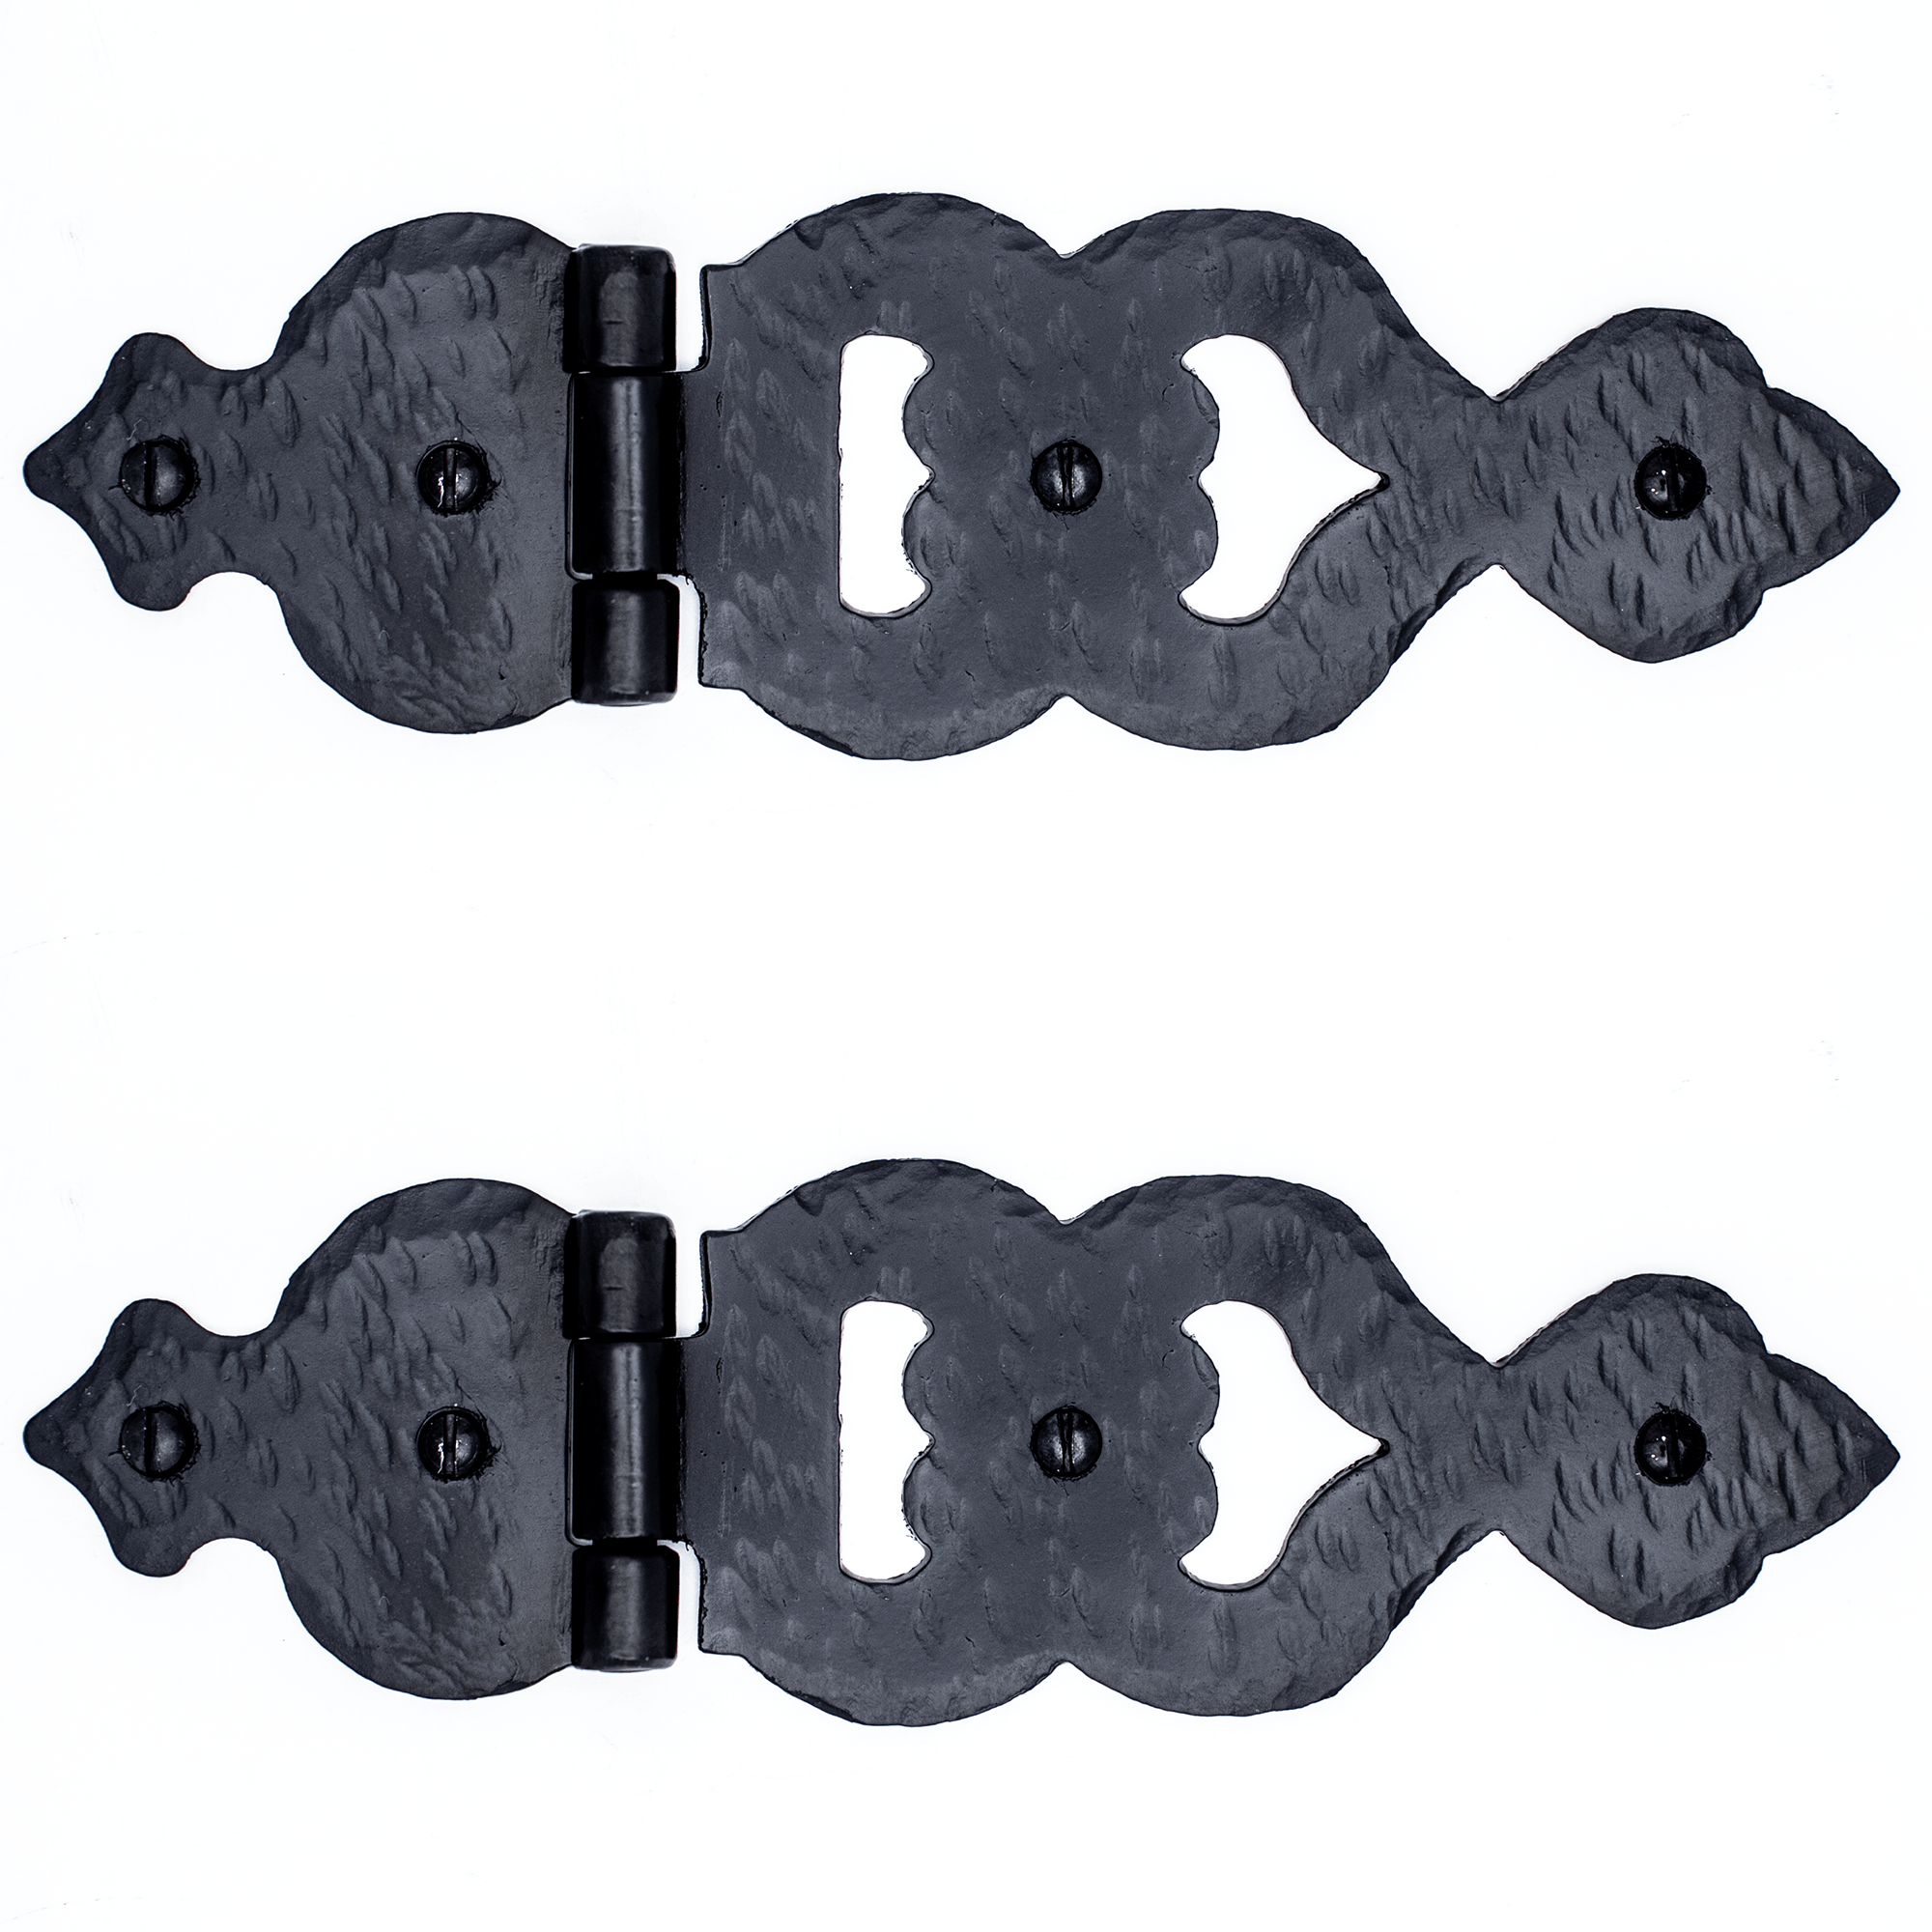 2 Pack 4 inch Decorative Hinges Black Wrought Iron Hinges Decorative Hinges  Small Flush Mount Western Style Hinges Vintage Furniture Hardware The